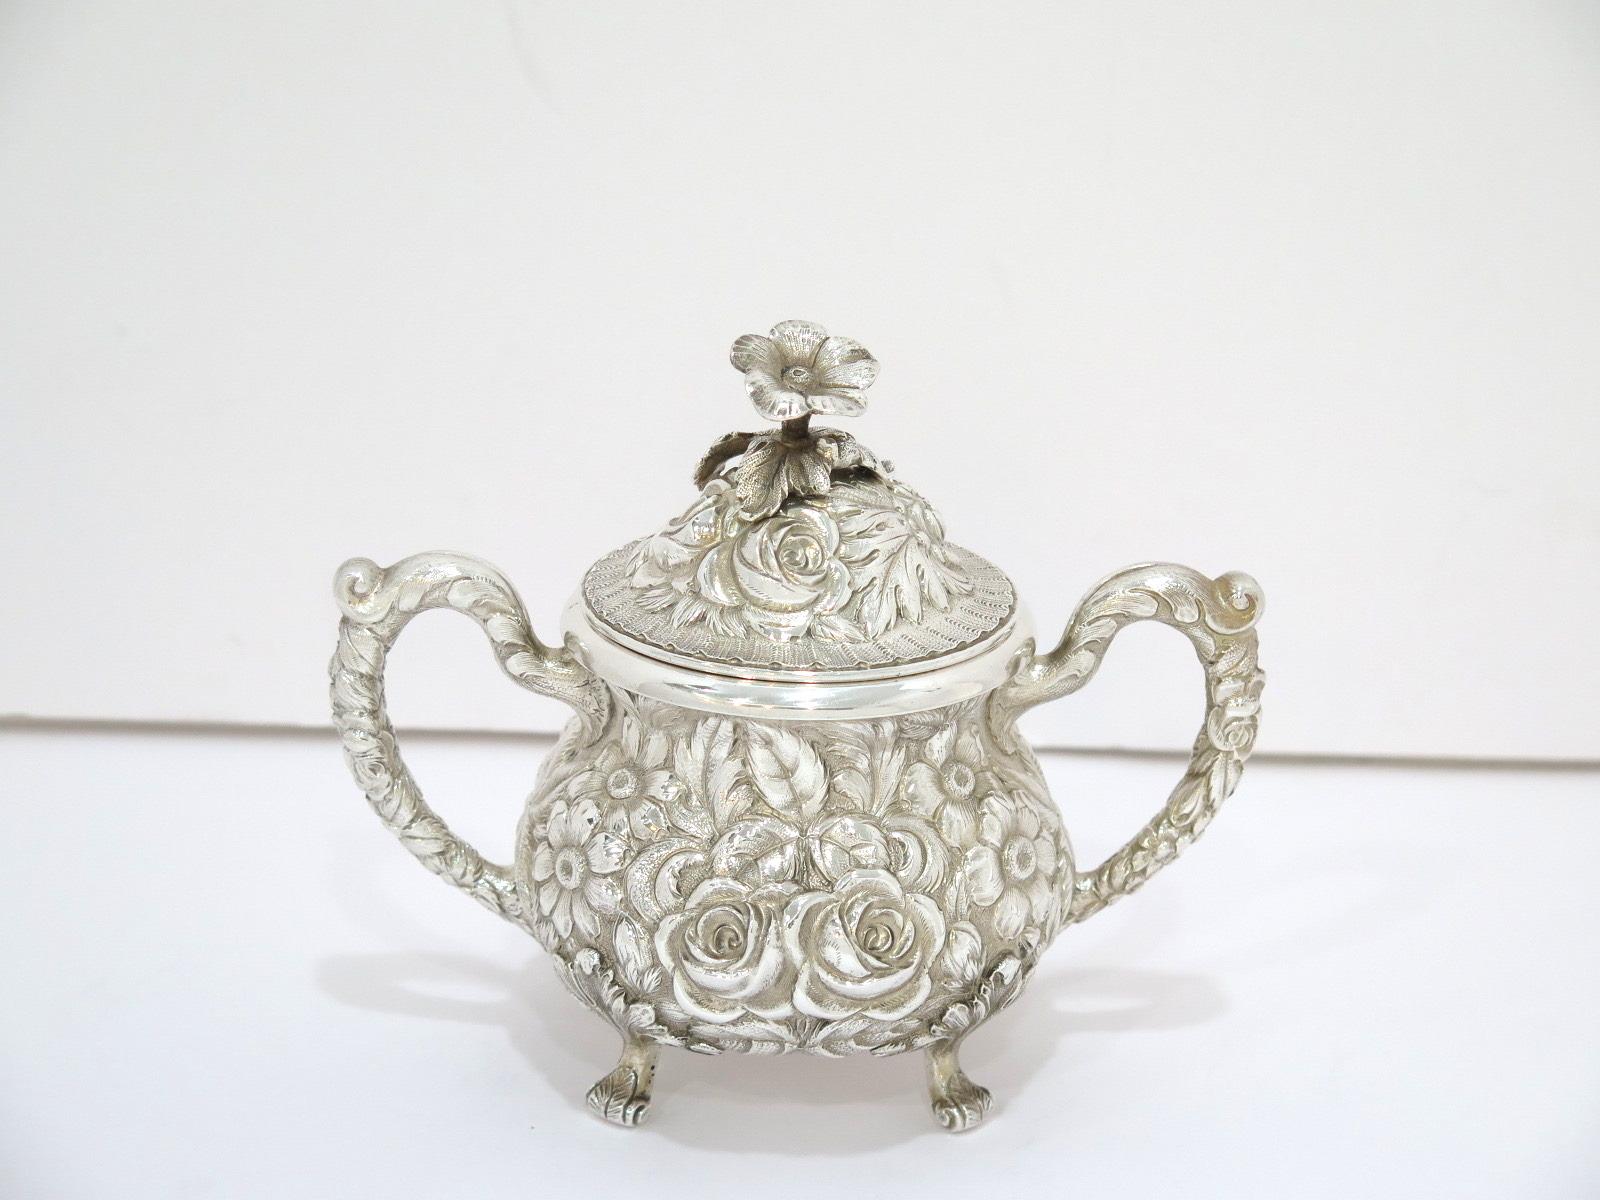 4 Piece Sterling Silver Stieff Antique Floral Repousse Tea / Coffee Service In Good Condition For Sale In Brooklyn, NY